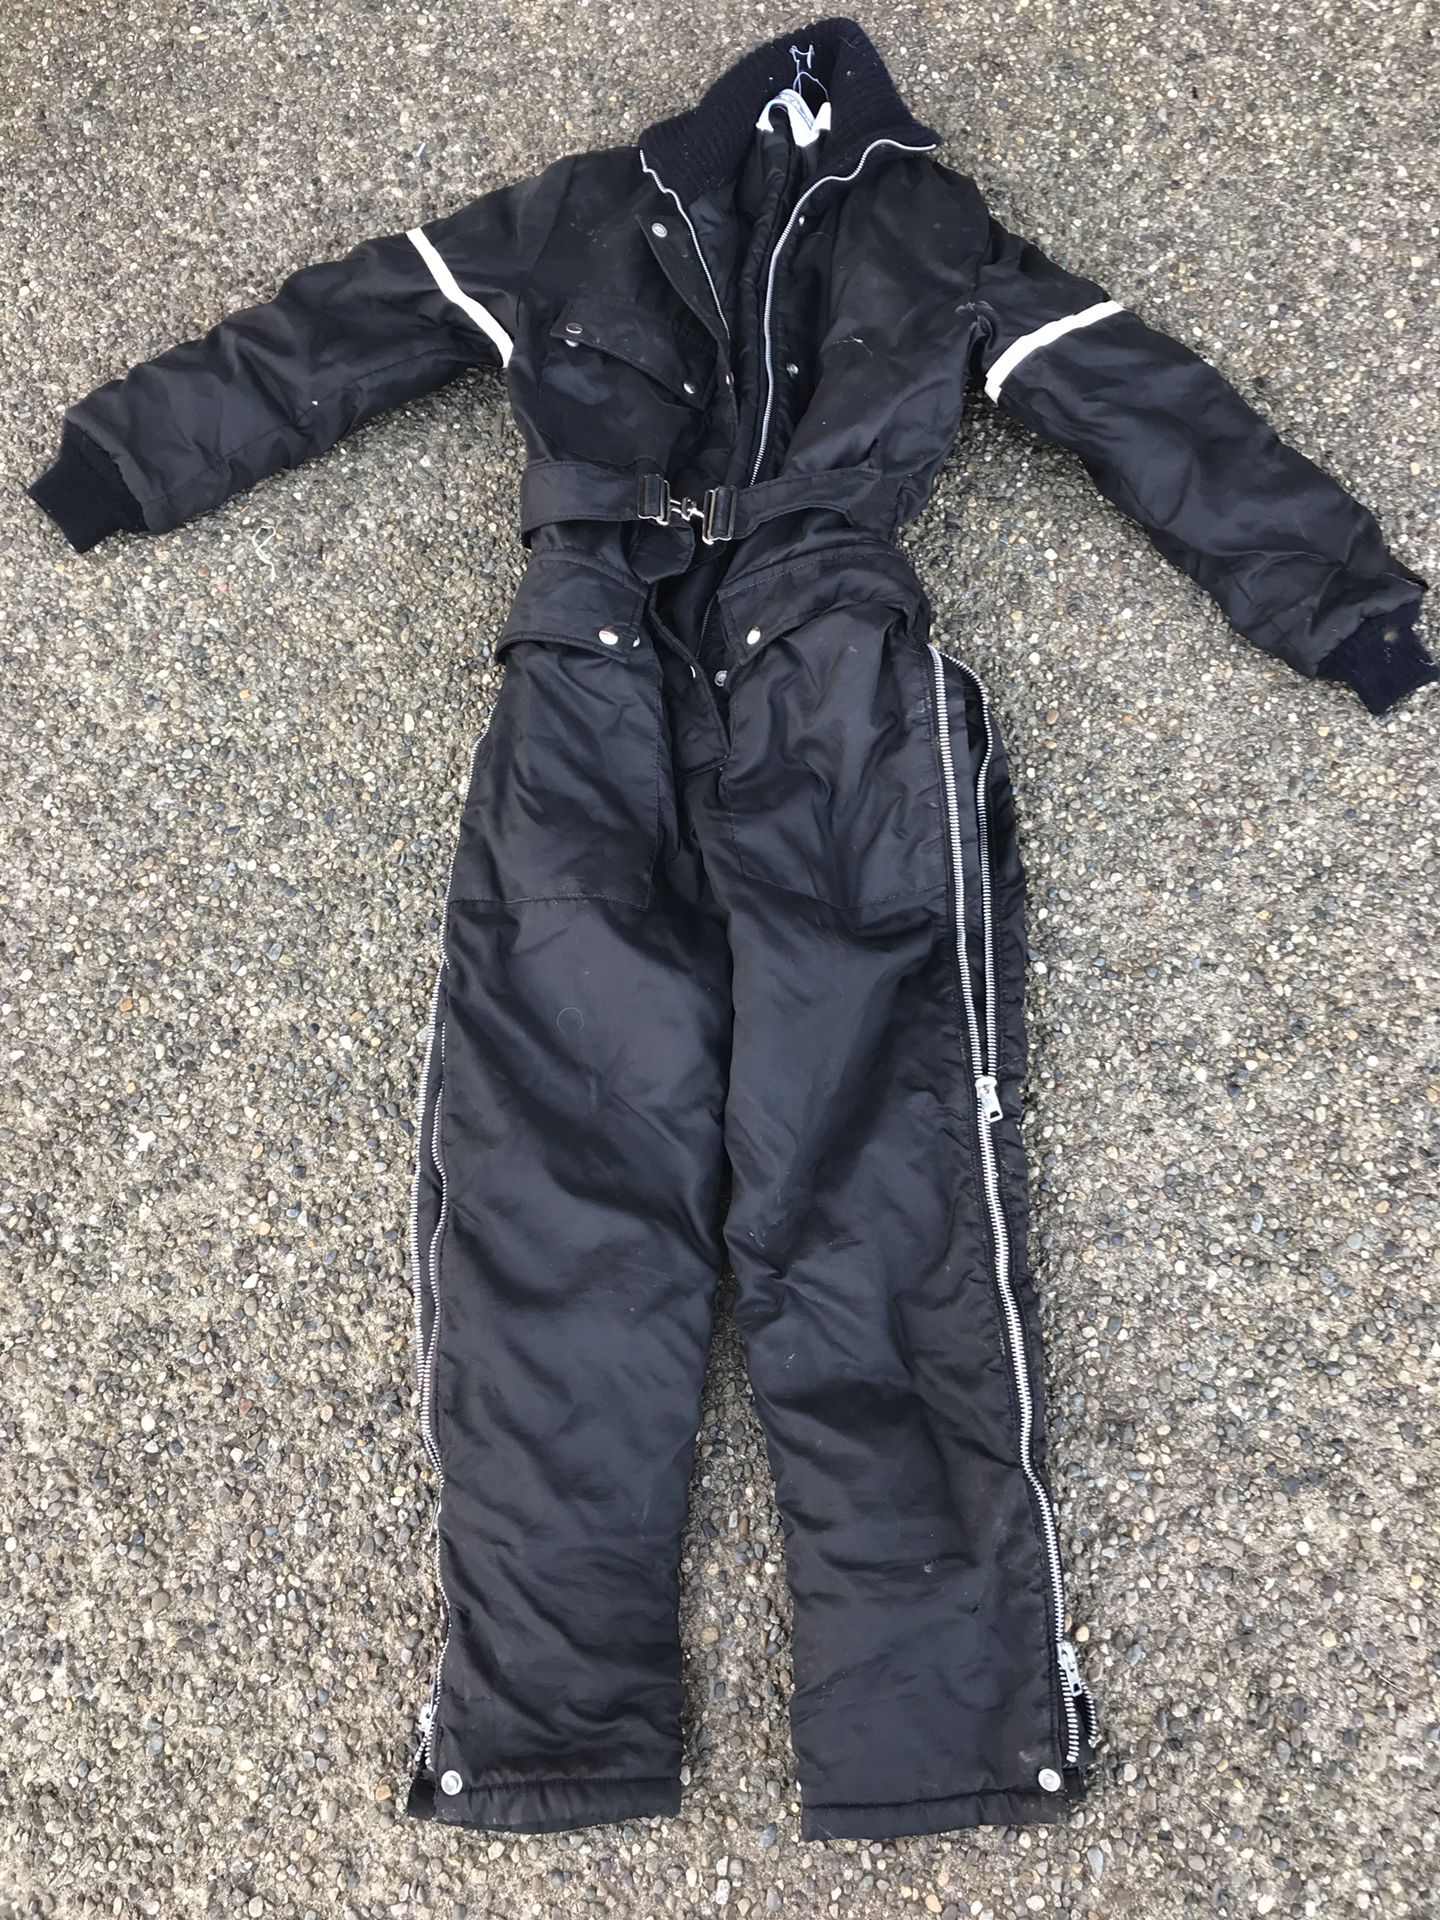 Ladies small Cold weather suit.